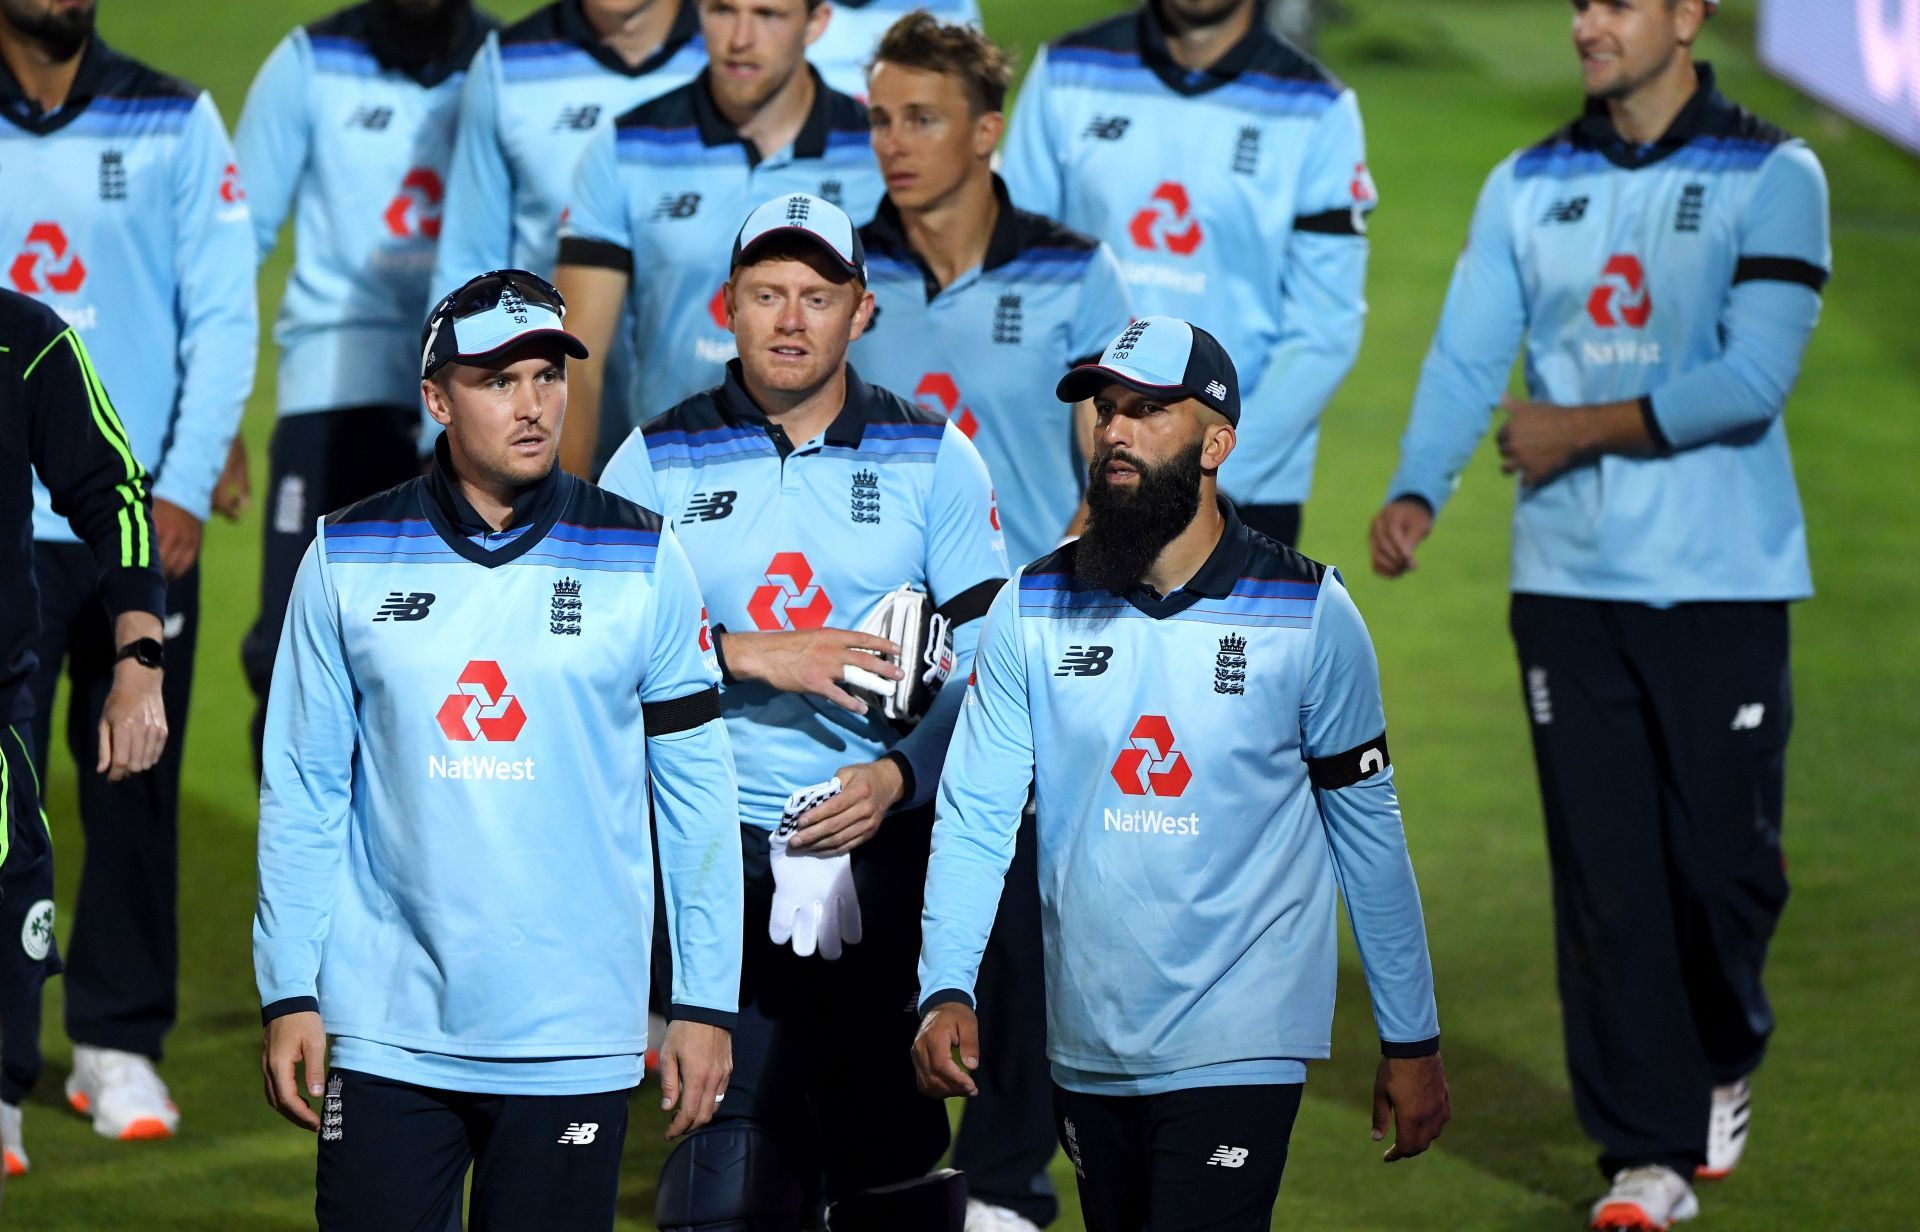 England are hot favorites going into the T20 World Cup